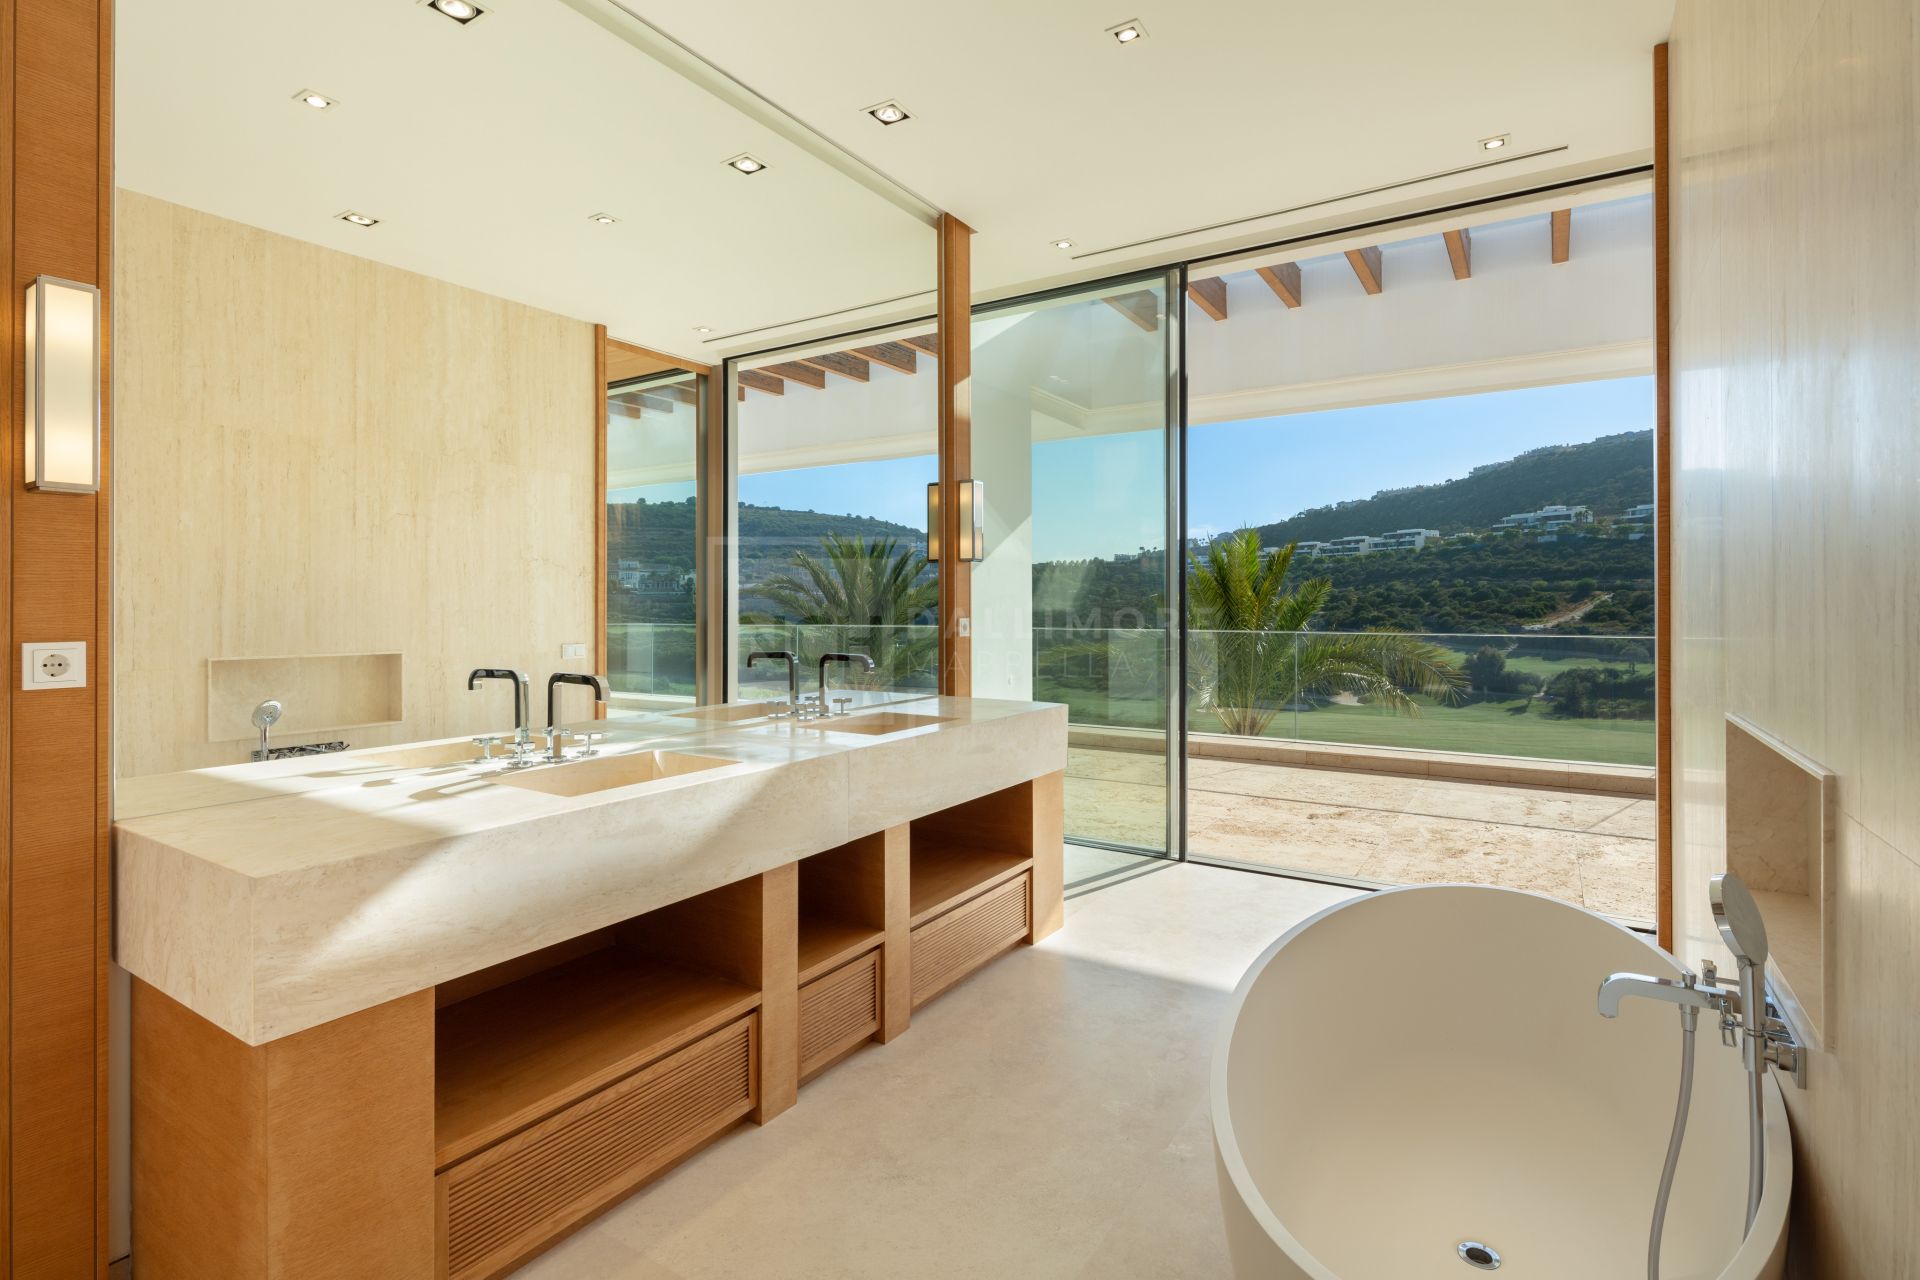 UNIQUE FRONT-LINE GOLF MANSION LOACTED IN FINCA CORTESIN